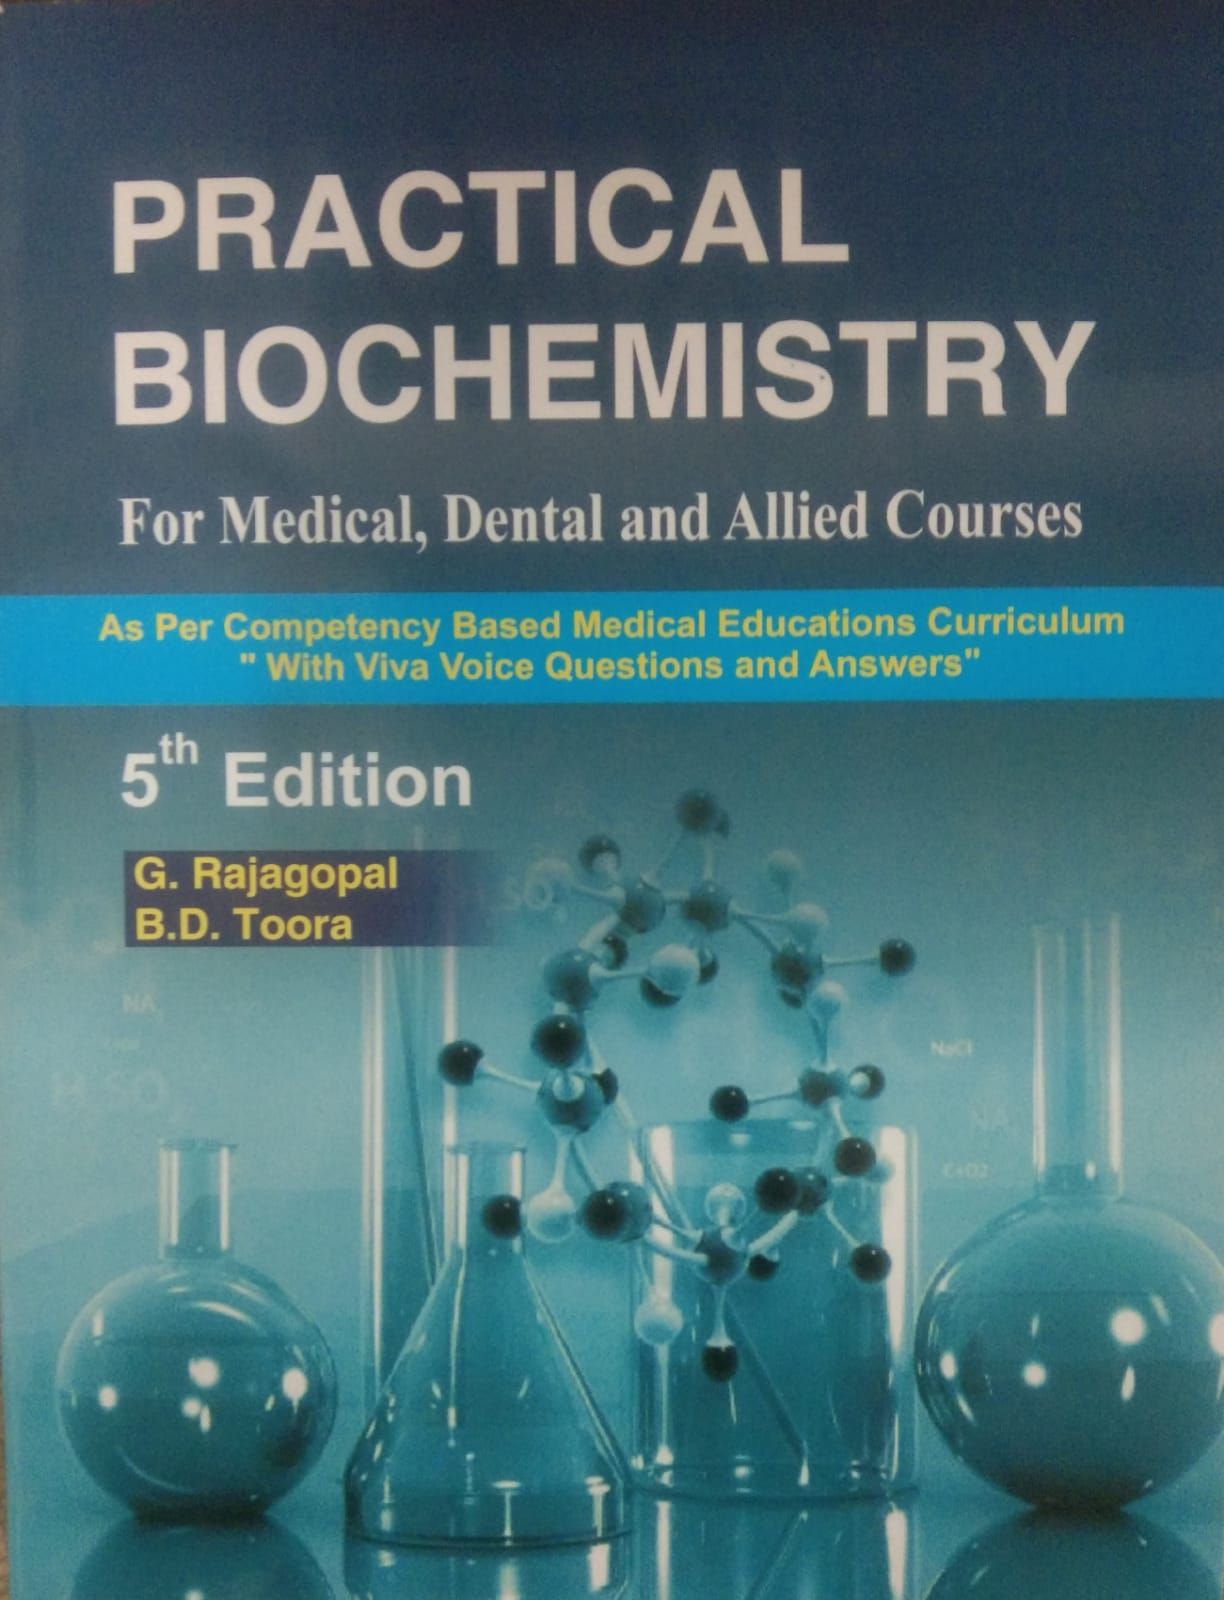 

exclusive-publishers/ahuja-publishing-house/practical-biochemistry-for-medical-dental-and-allied-courses-as-per-competency-based-medical-educations-curriculum-with-viva-voice-question-and-answers-9789380316864